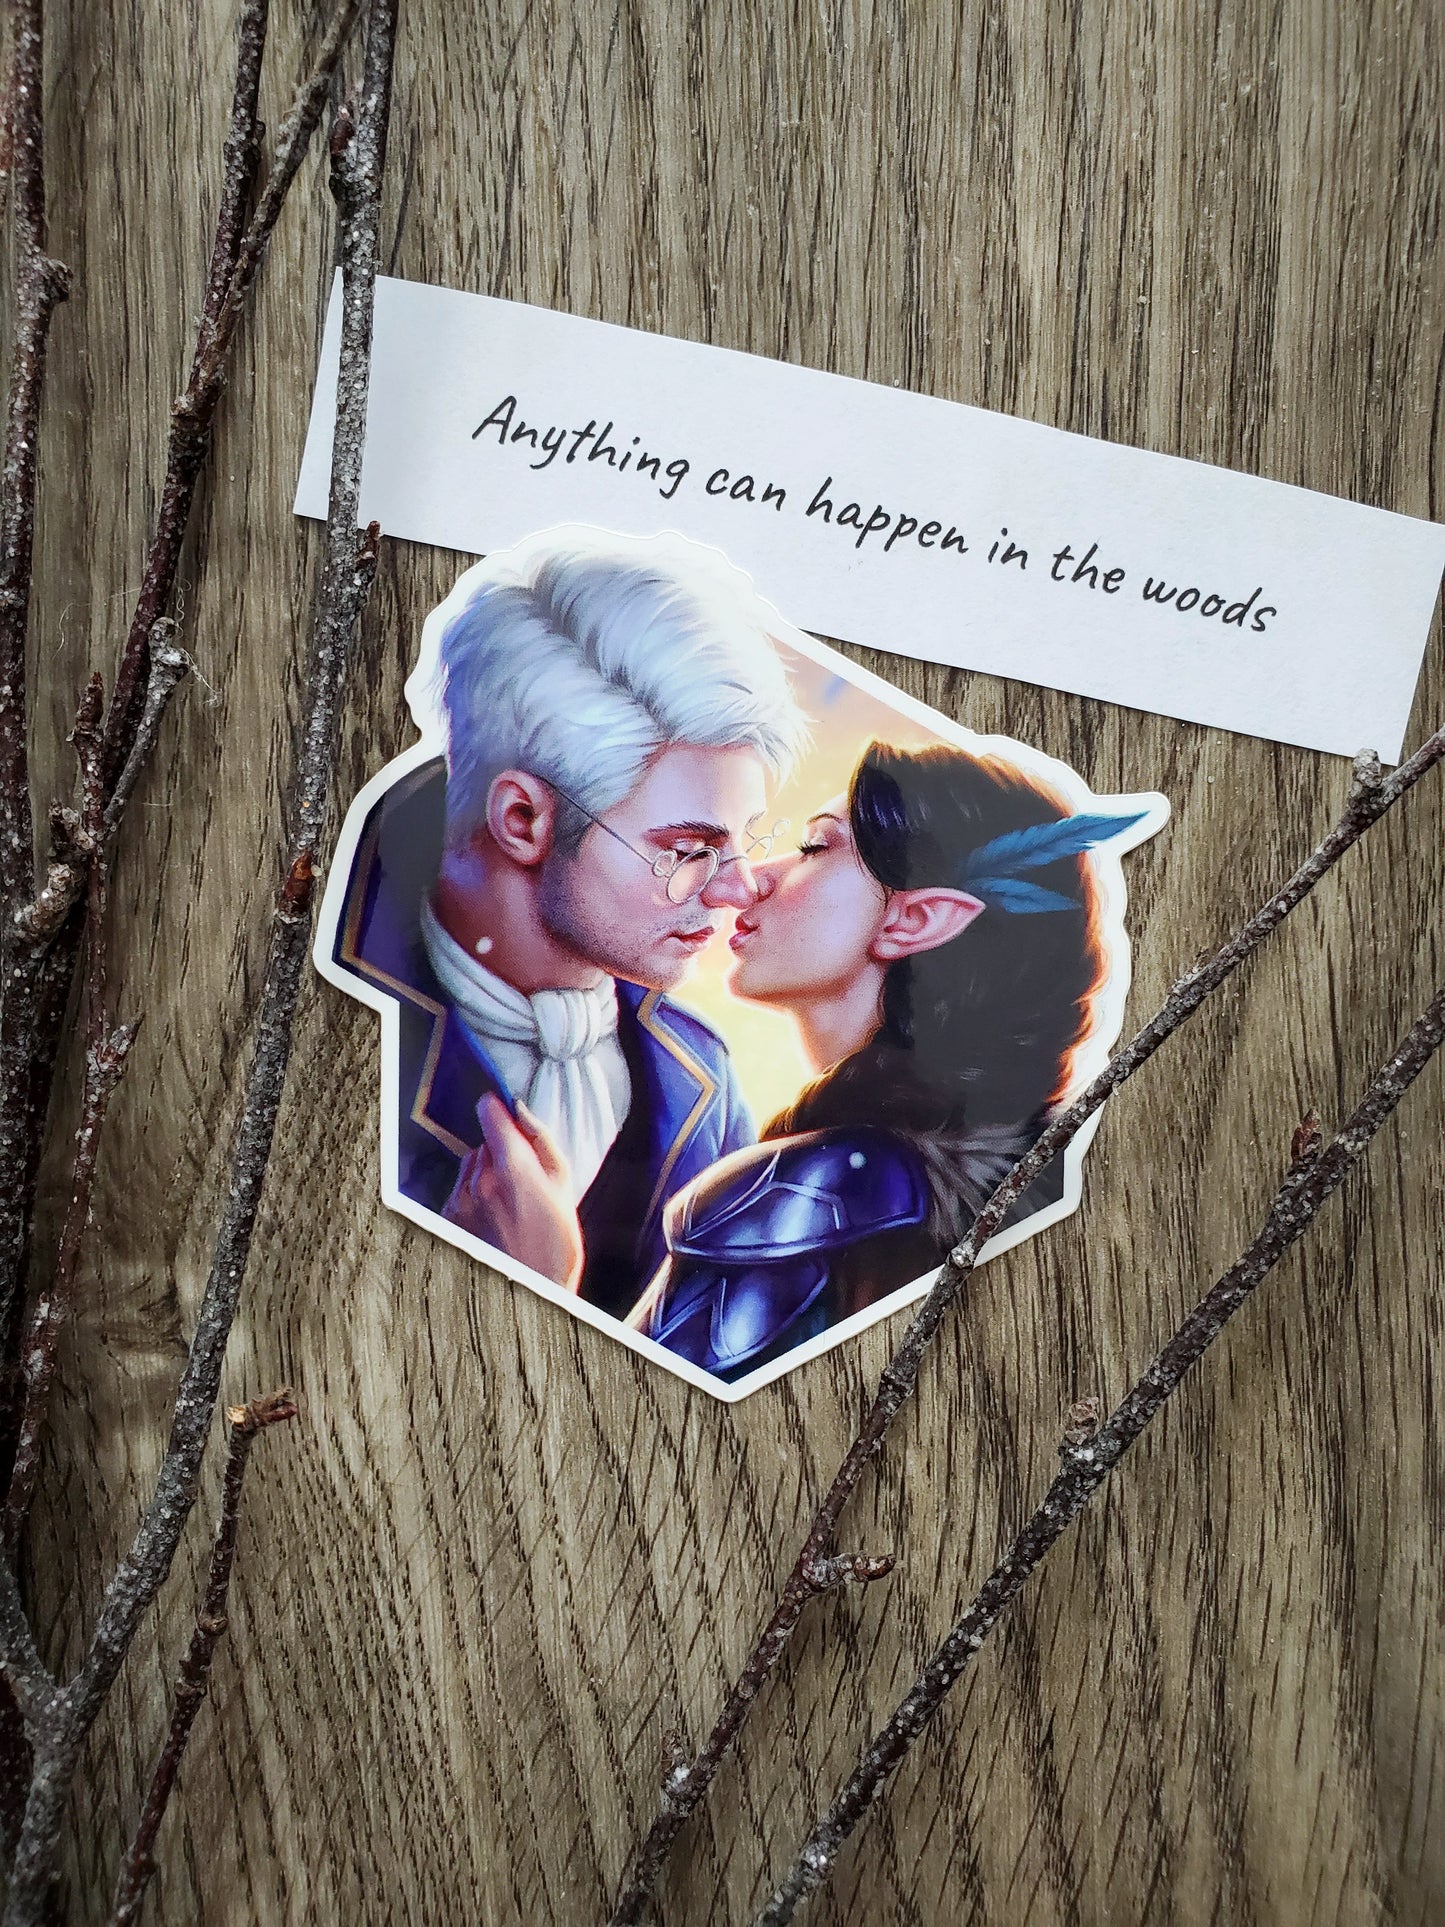 "Anything can happen in the woods" - Sticker